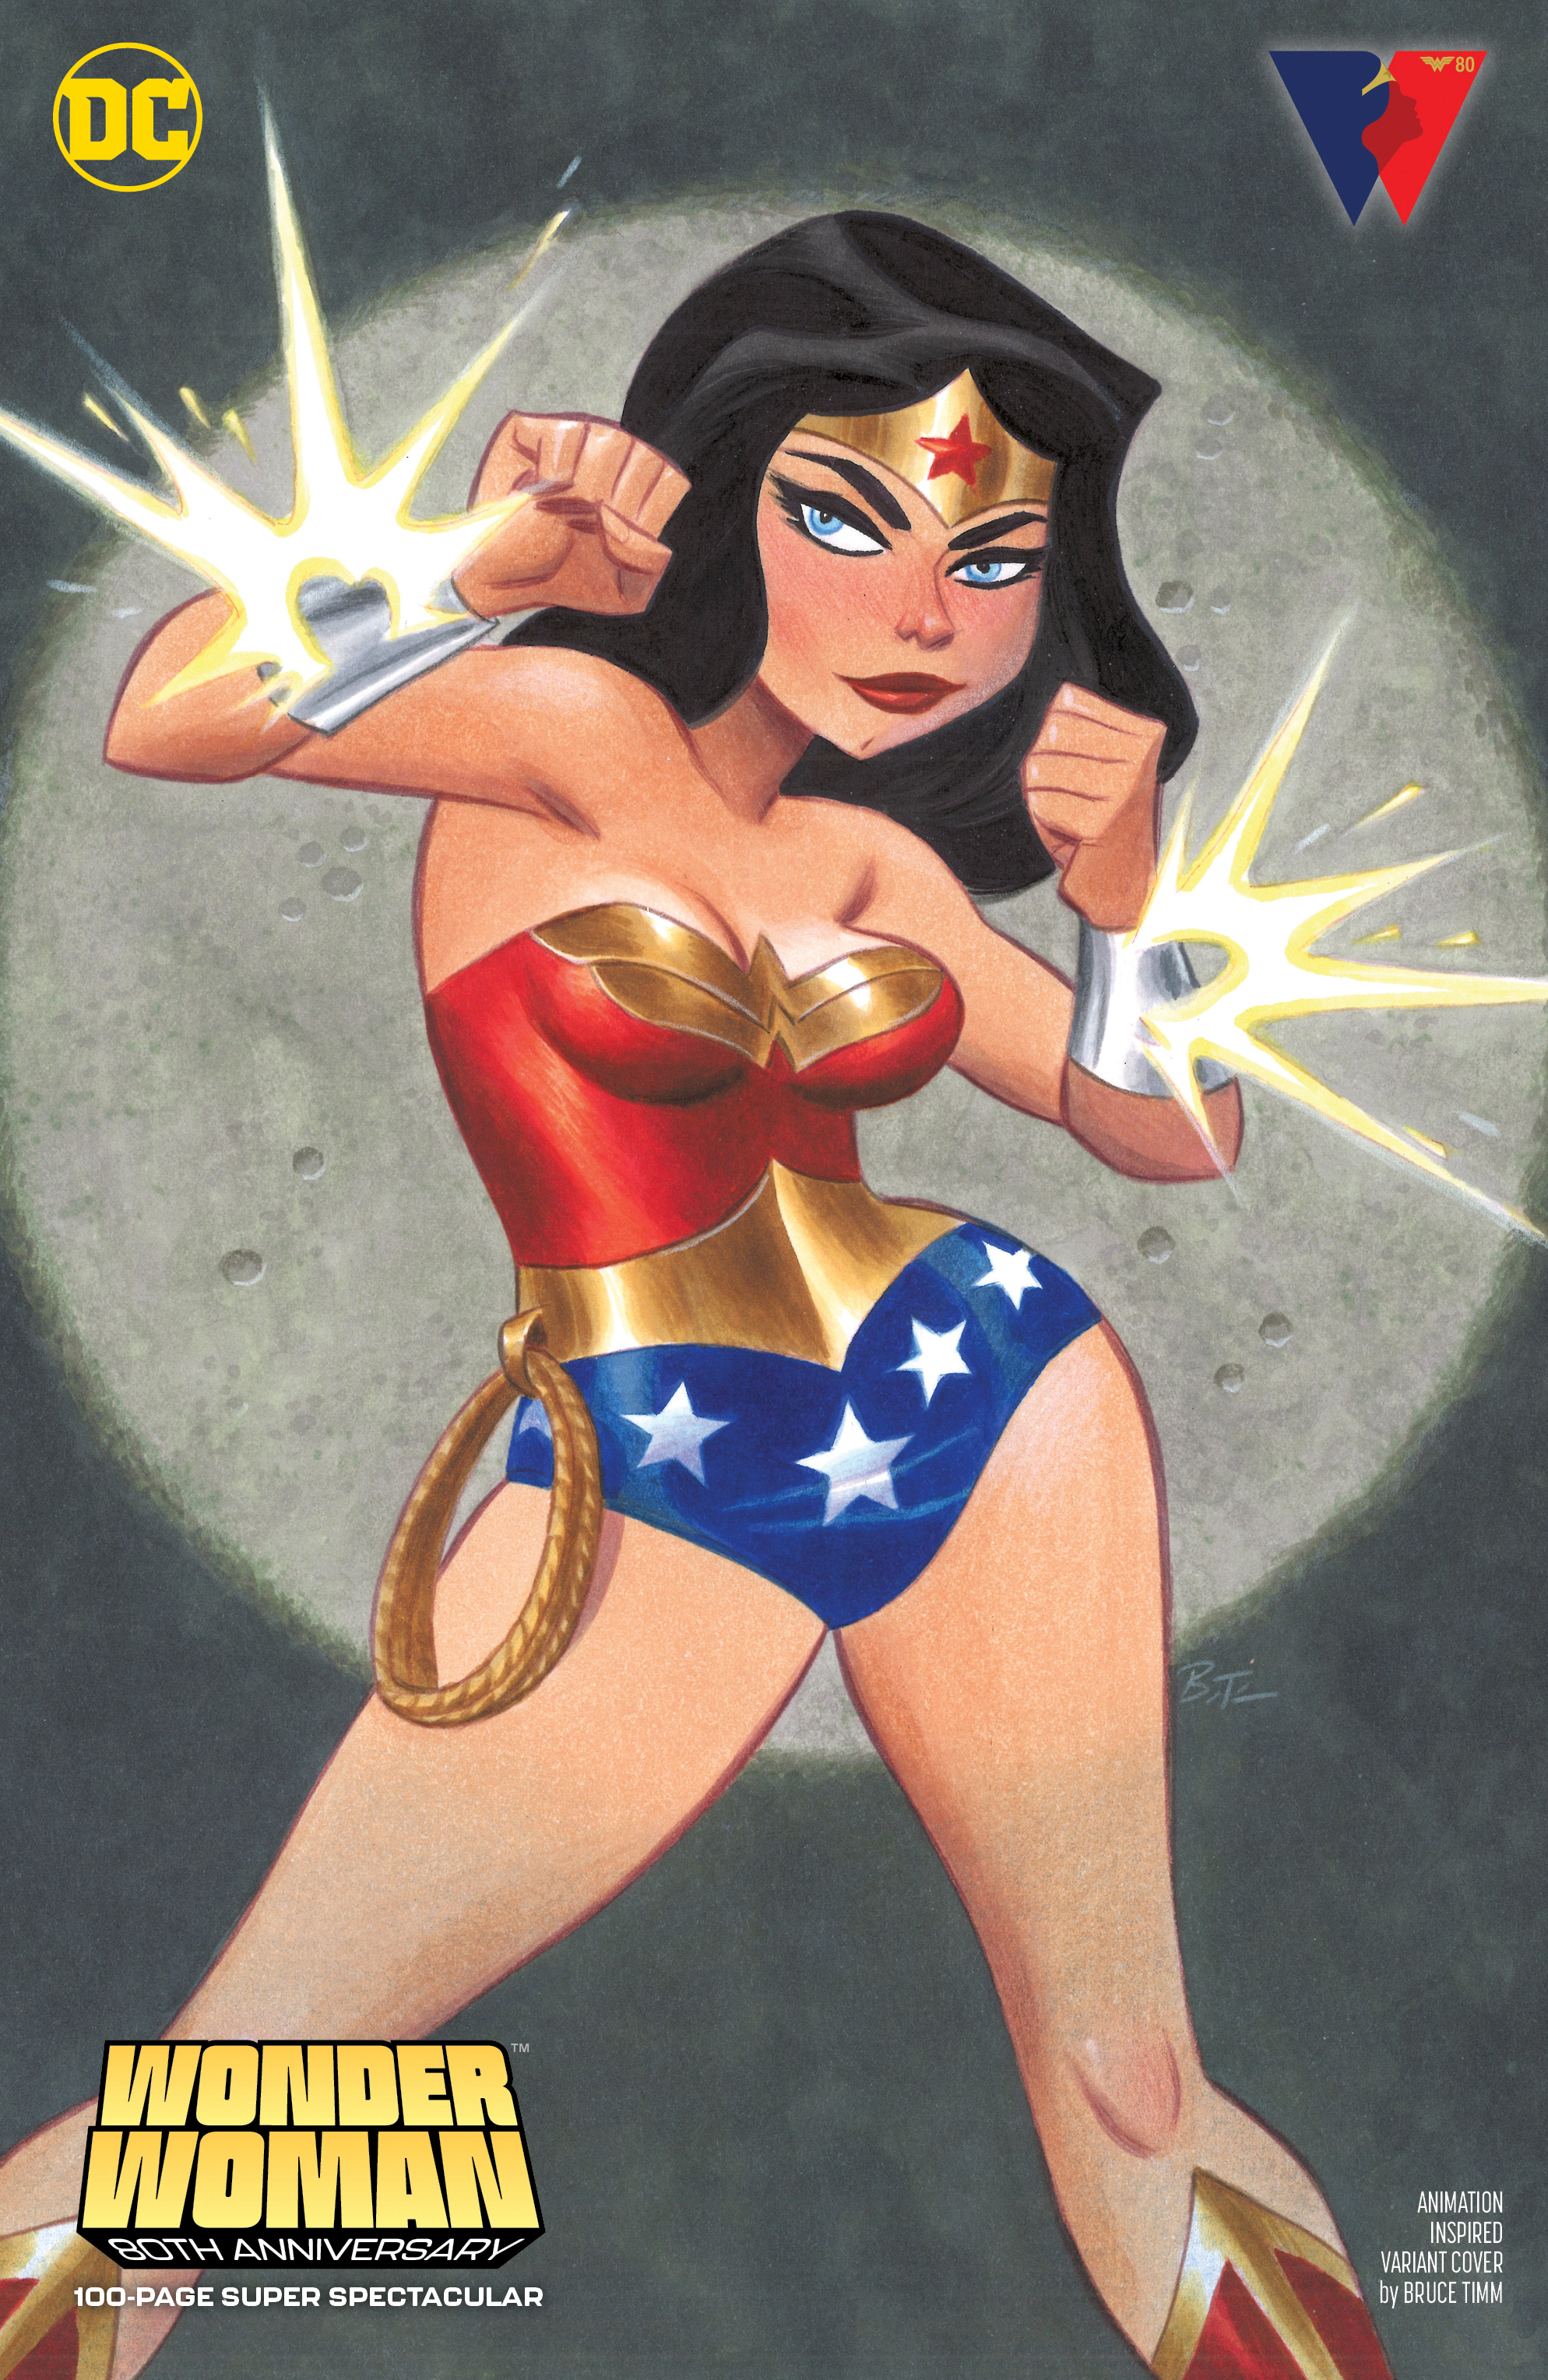 Wonder Woman 80th Anniversary 100-Page Super Spectacular #1 Cover D Bruce Timm Animation